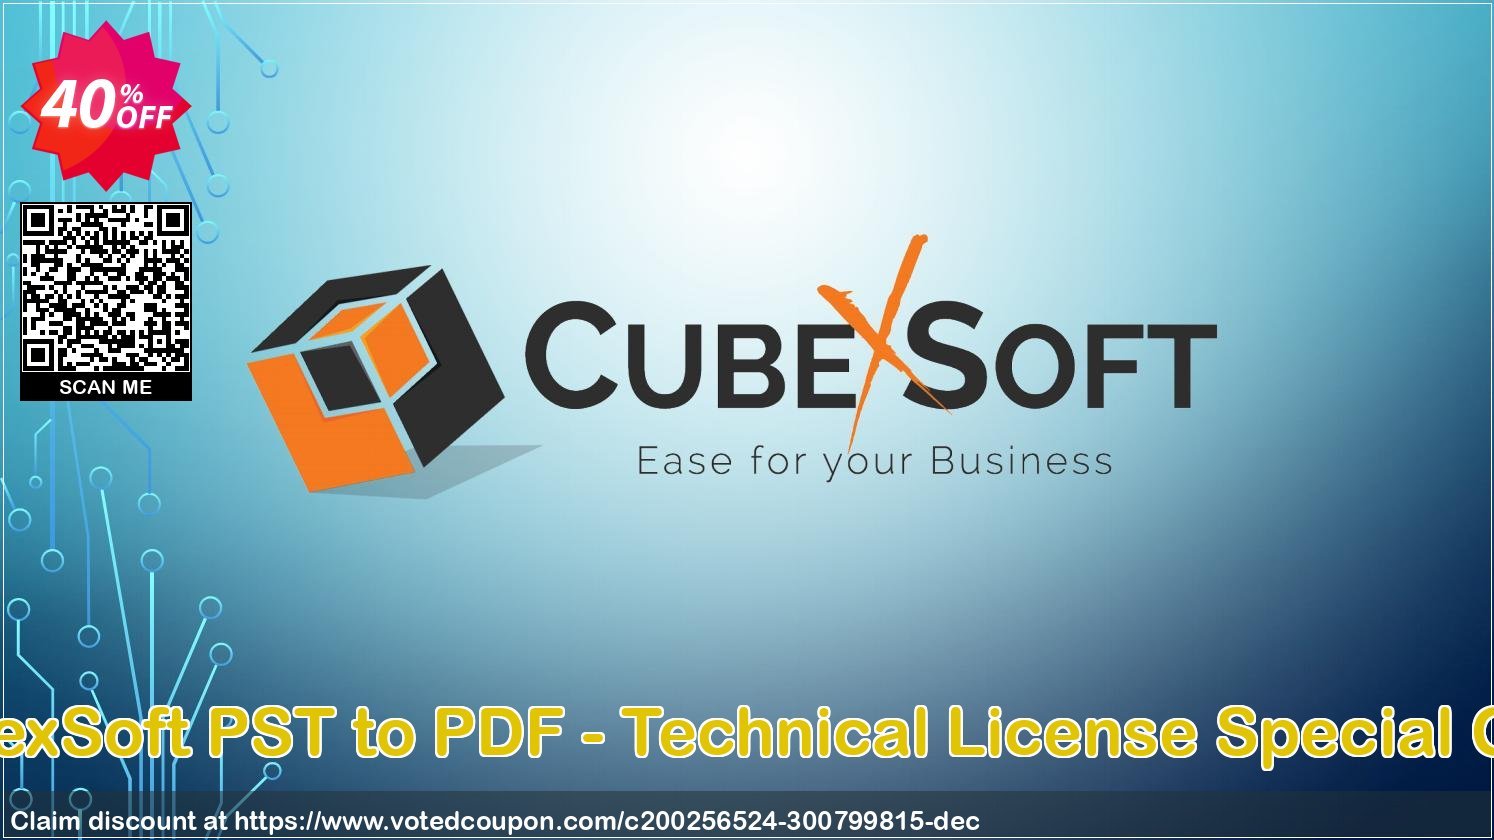 CubexSoft PST to PDF - Technical Plan Special Offer Coupon, discount Coupon code CubexSoft PST to PDF - Technical License Special Offer. Promotion: CubexSoft PST to PDF - Technical License Special Offer offer from CubexSoft Tools Pvt. Ltd.